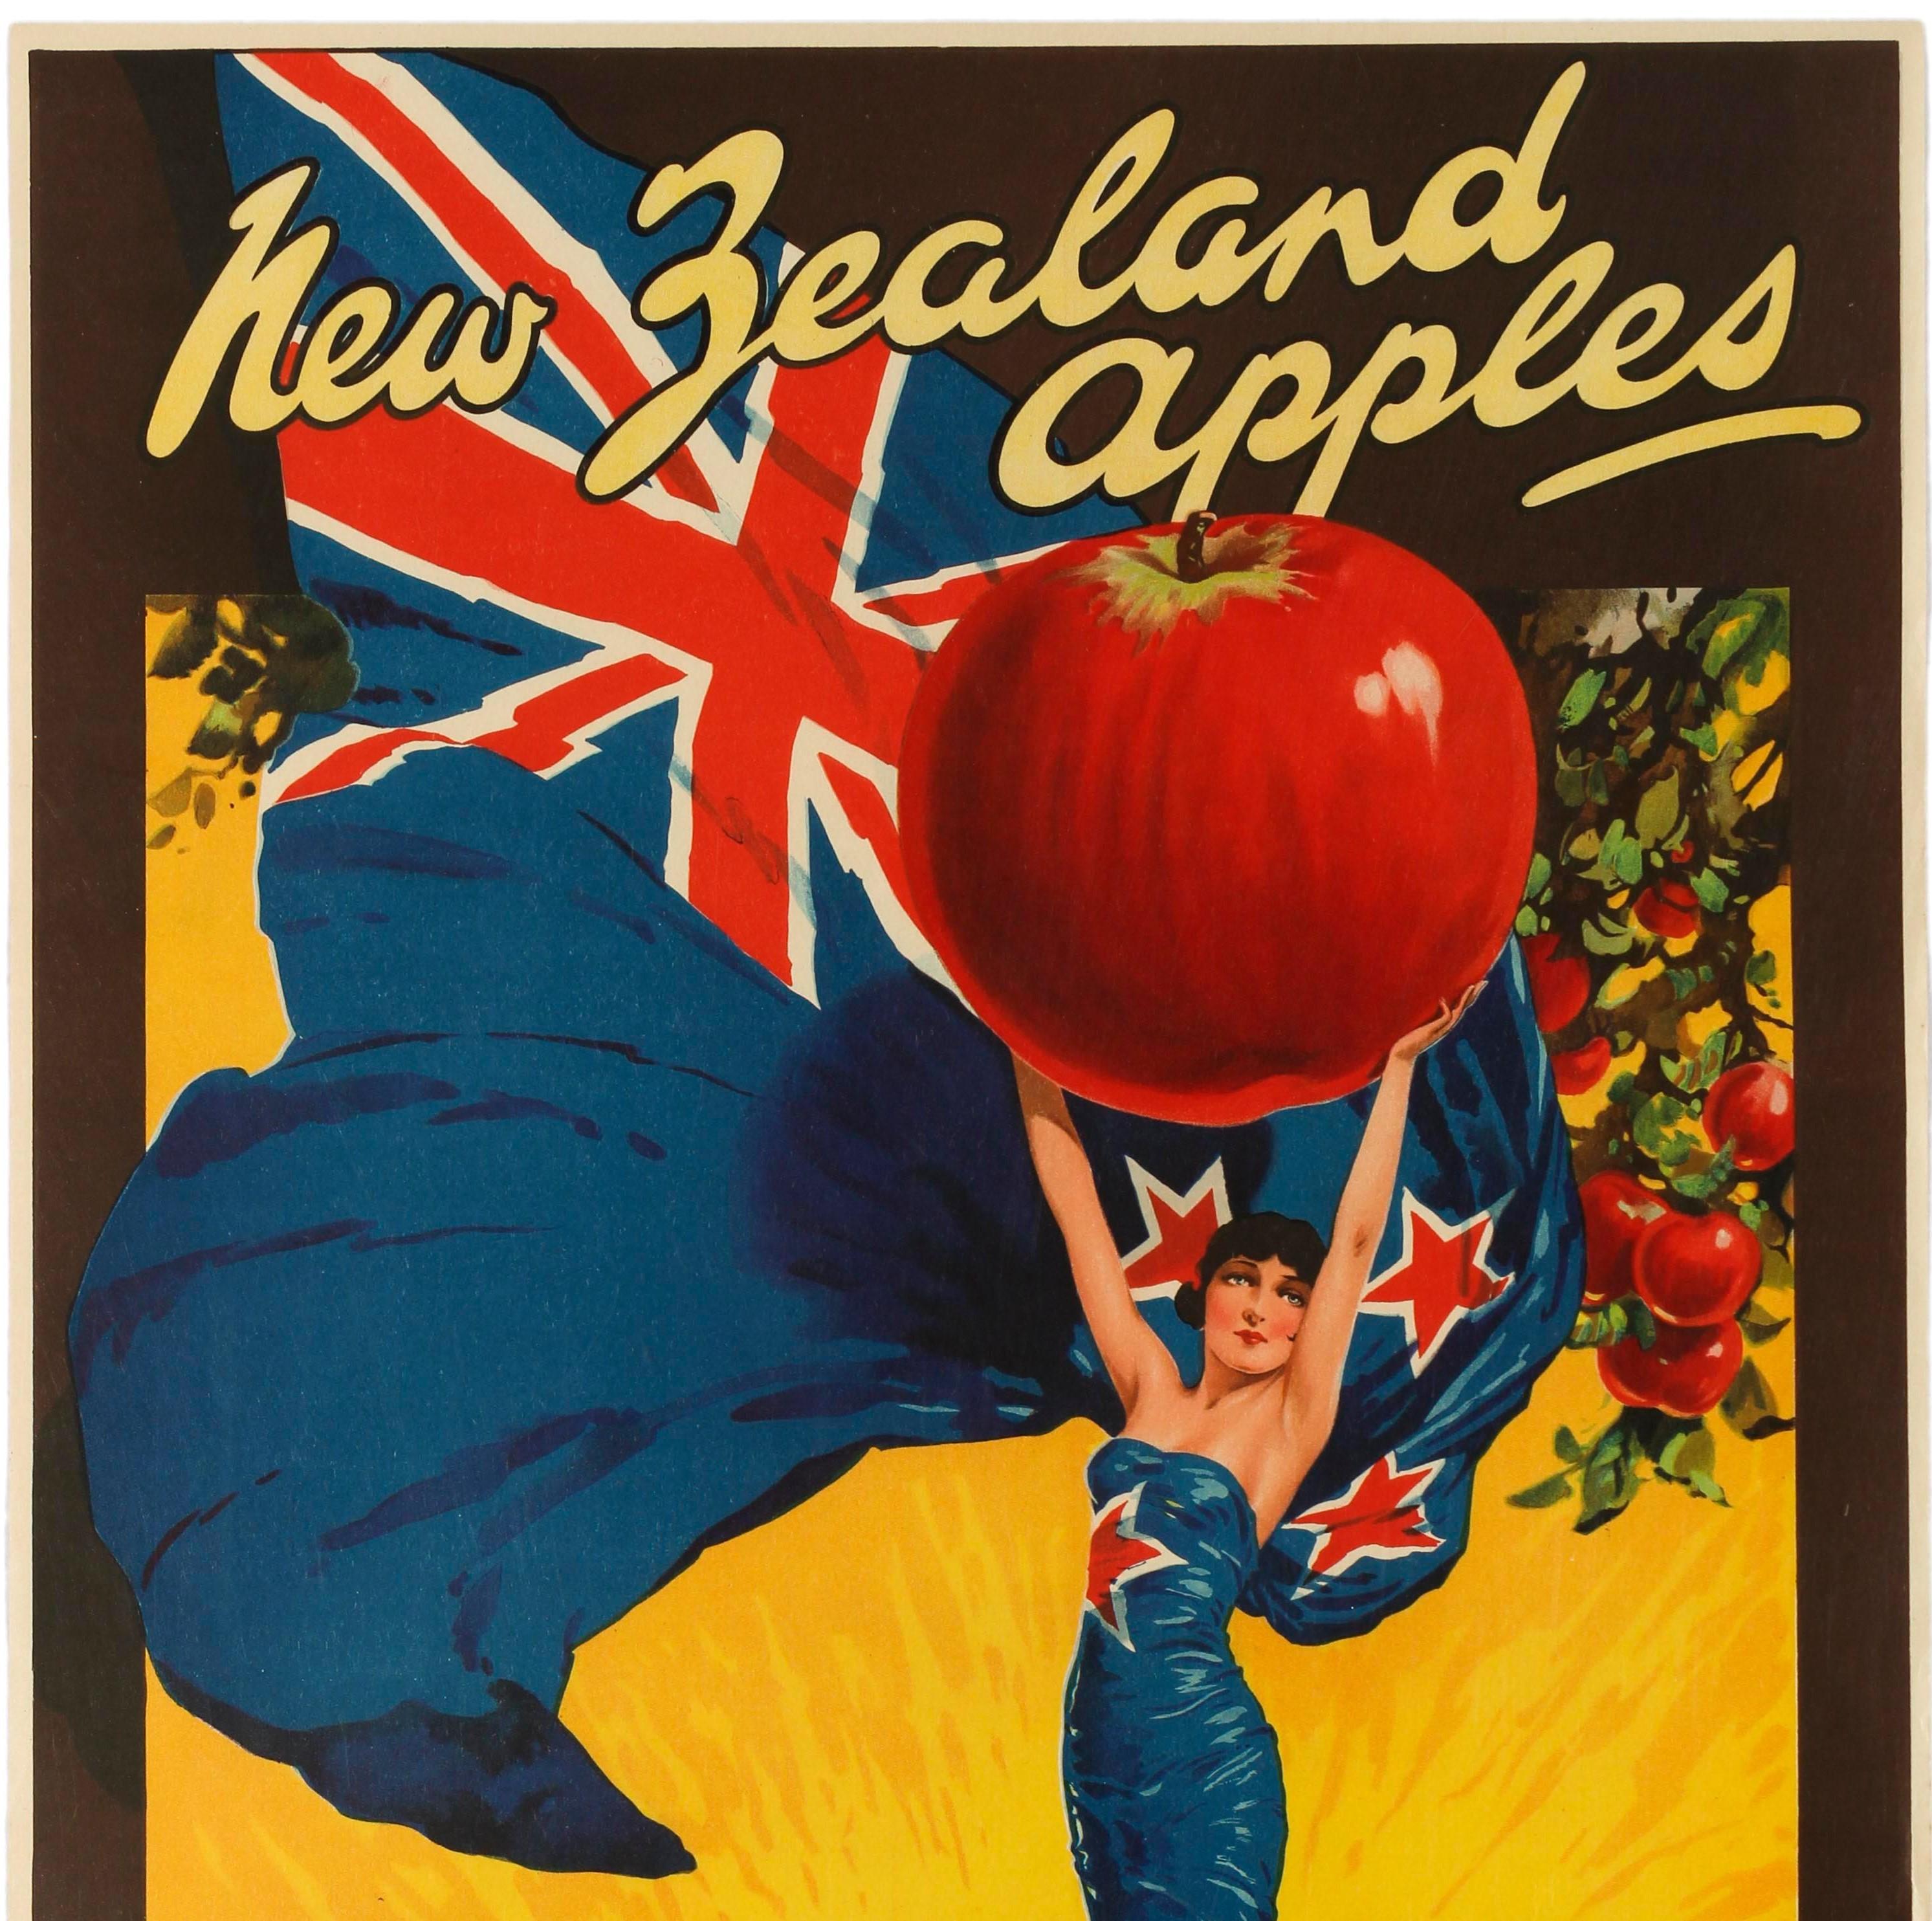 Original vintage British Empire trade advertising poster for New Zealand Apples featuring a colourful design depicting a young lady wrapped in a New Zealand flag and holding up a large red apple against a sunny yellow background with an apple tree